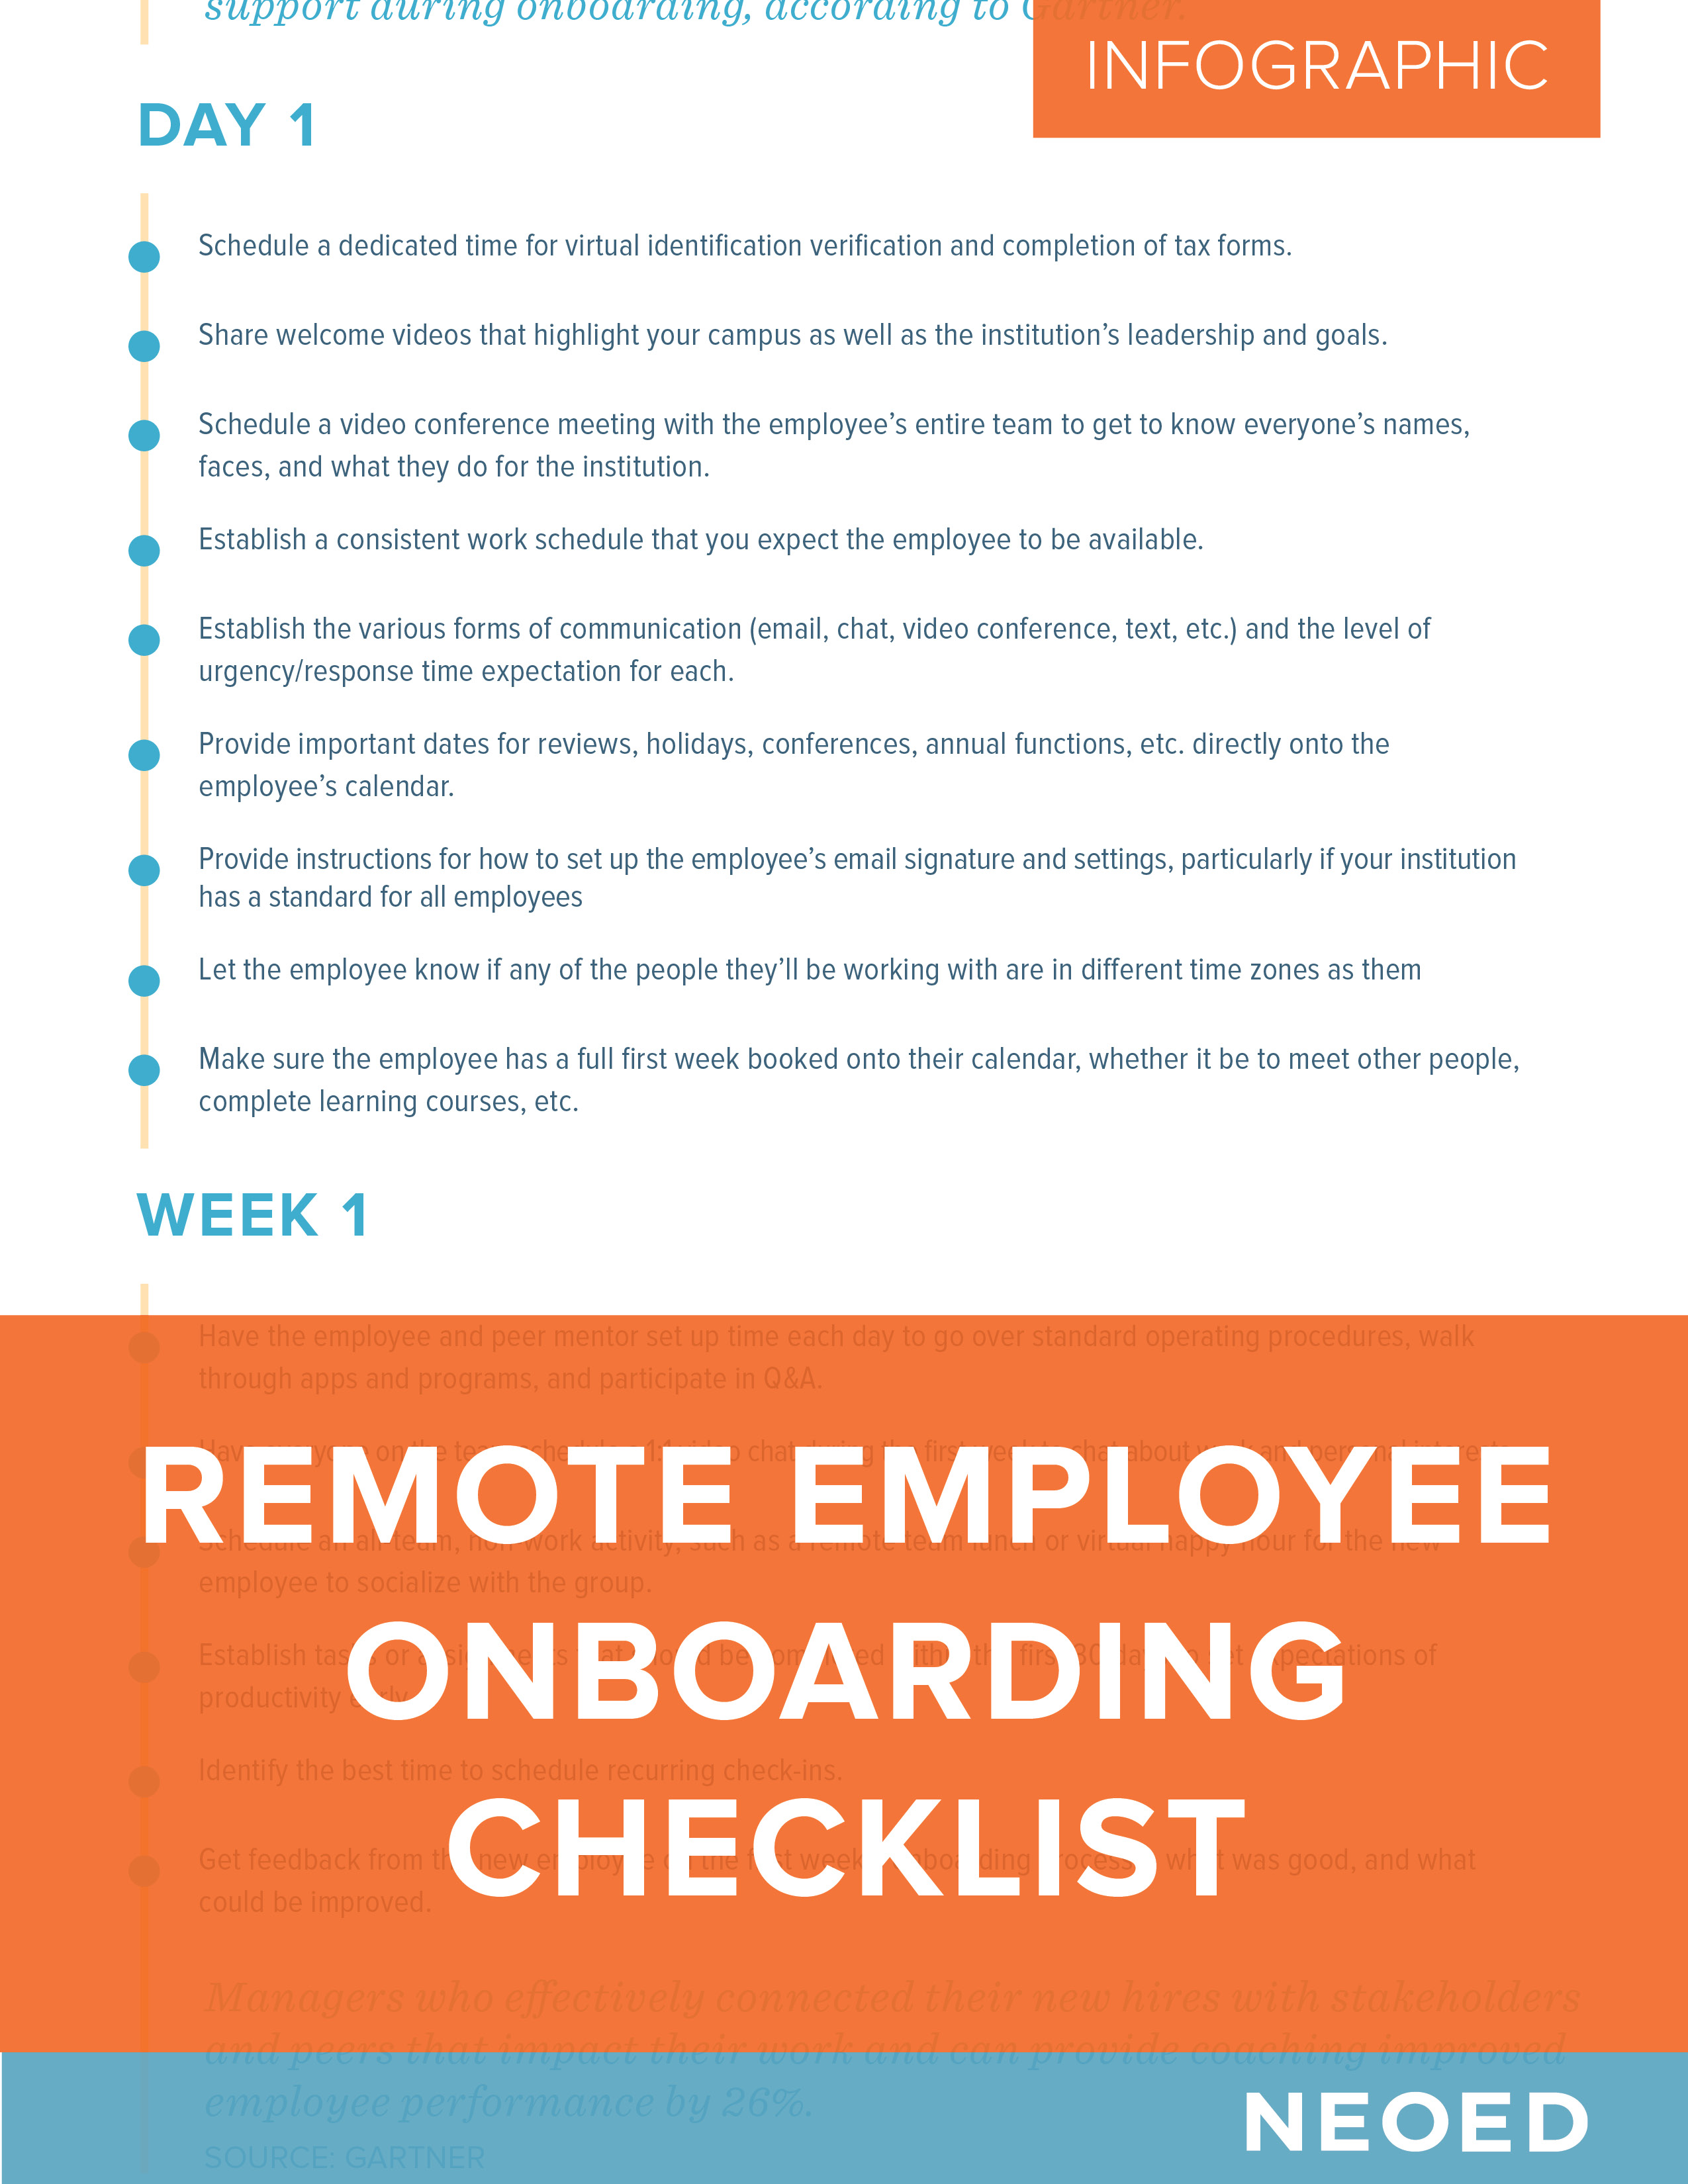 NEOED-Infographic-RemoteOnboardingChecklist-Thumbnail